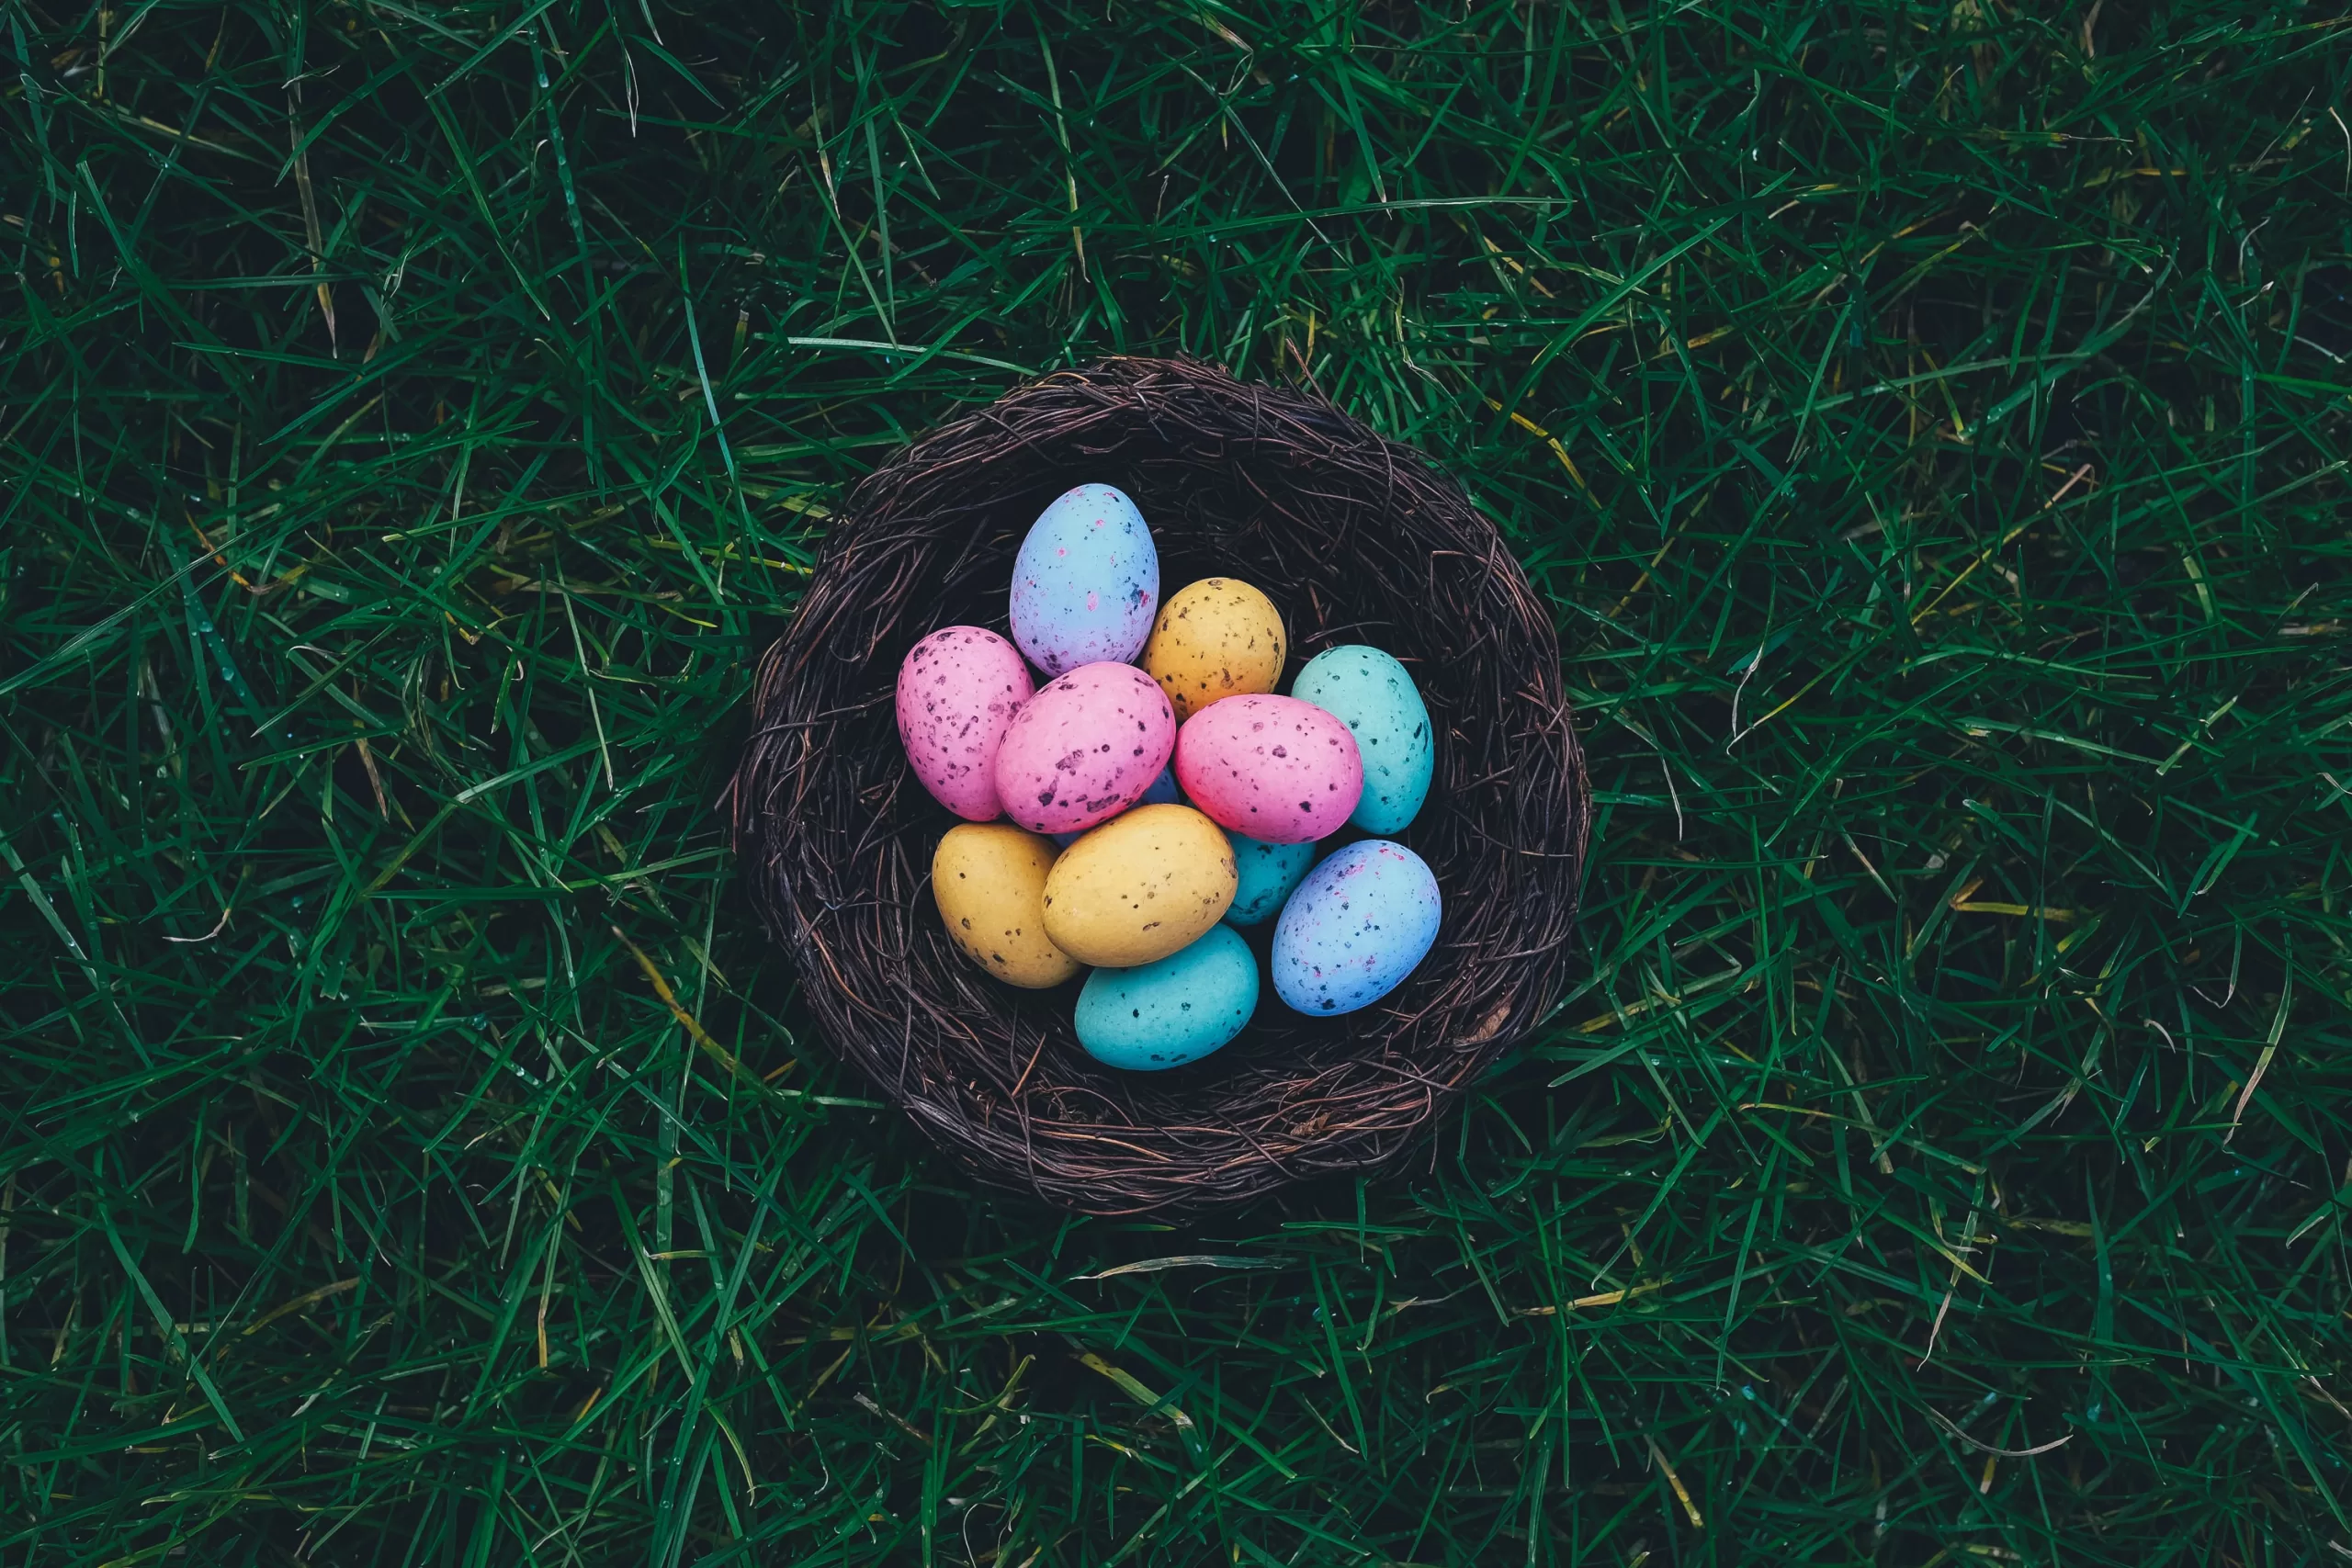 Do you think Easter is the most important Holiday for Christians?